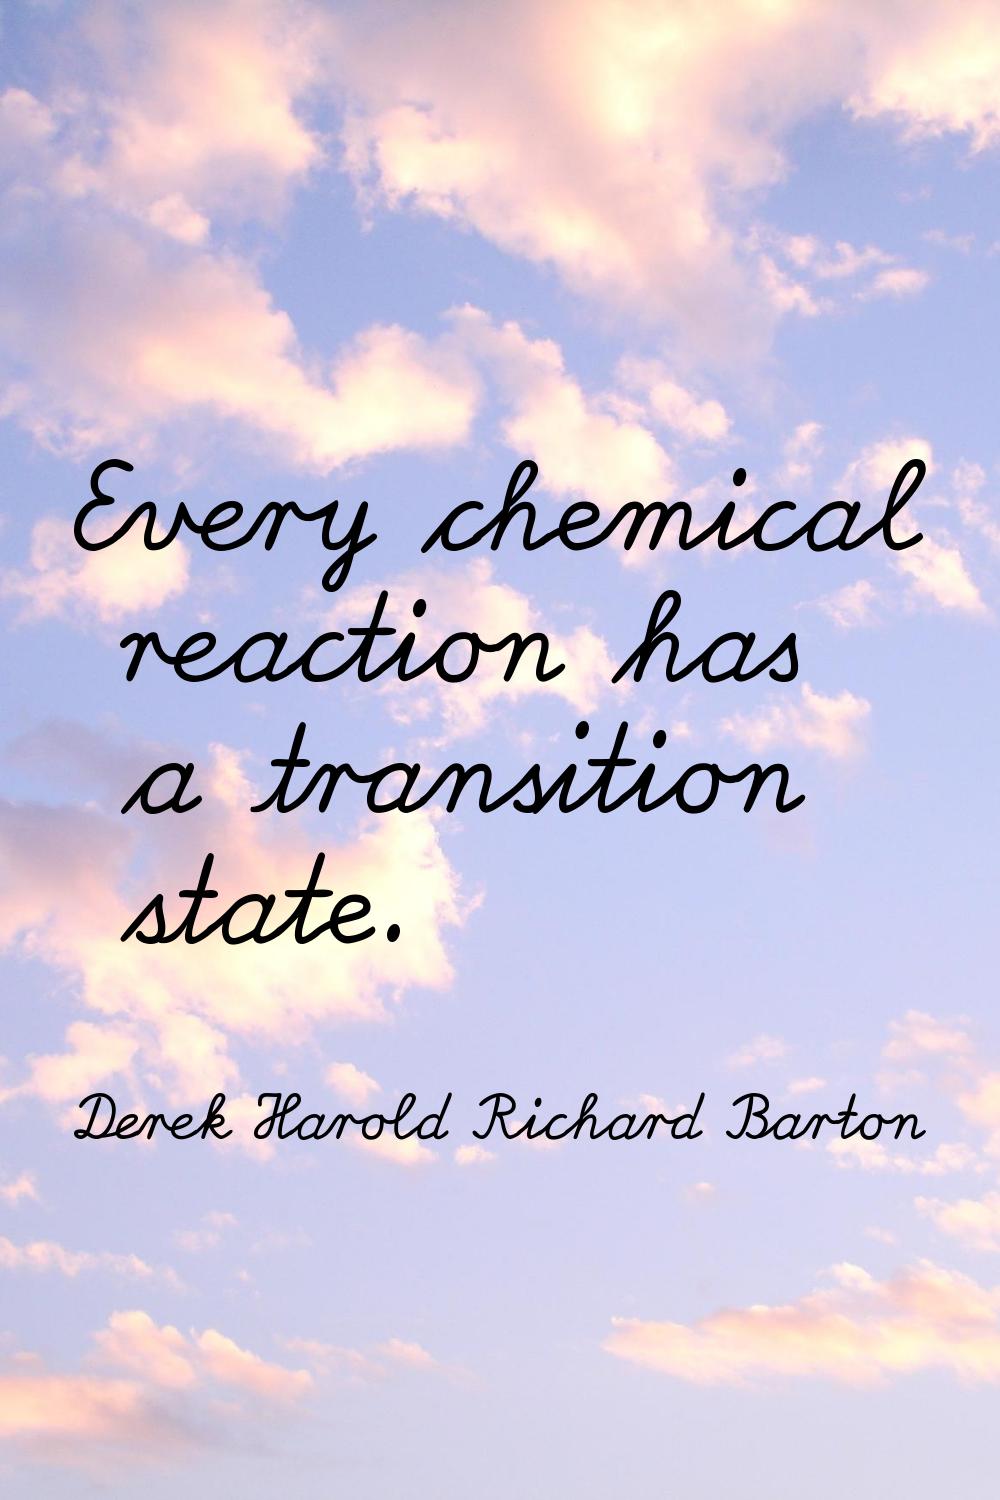 Every chemical reaction has a transition state.